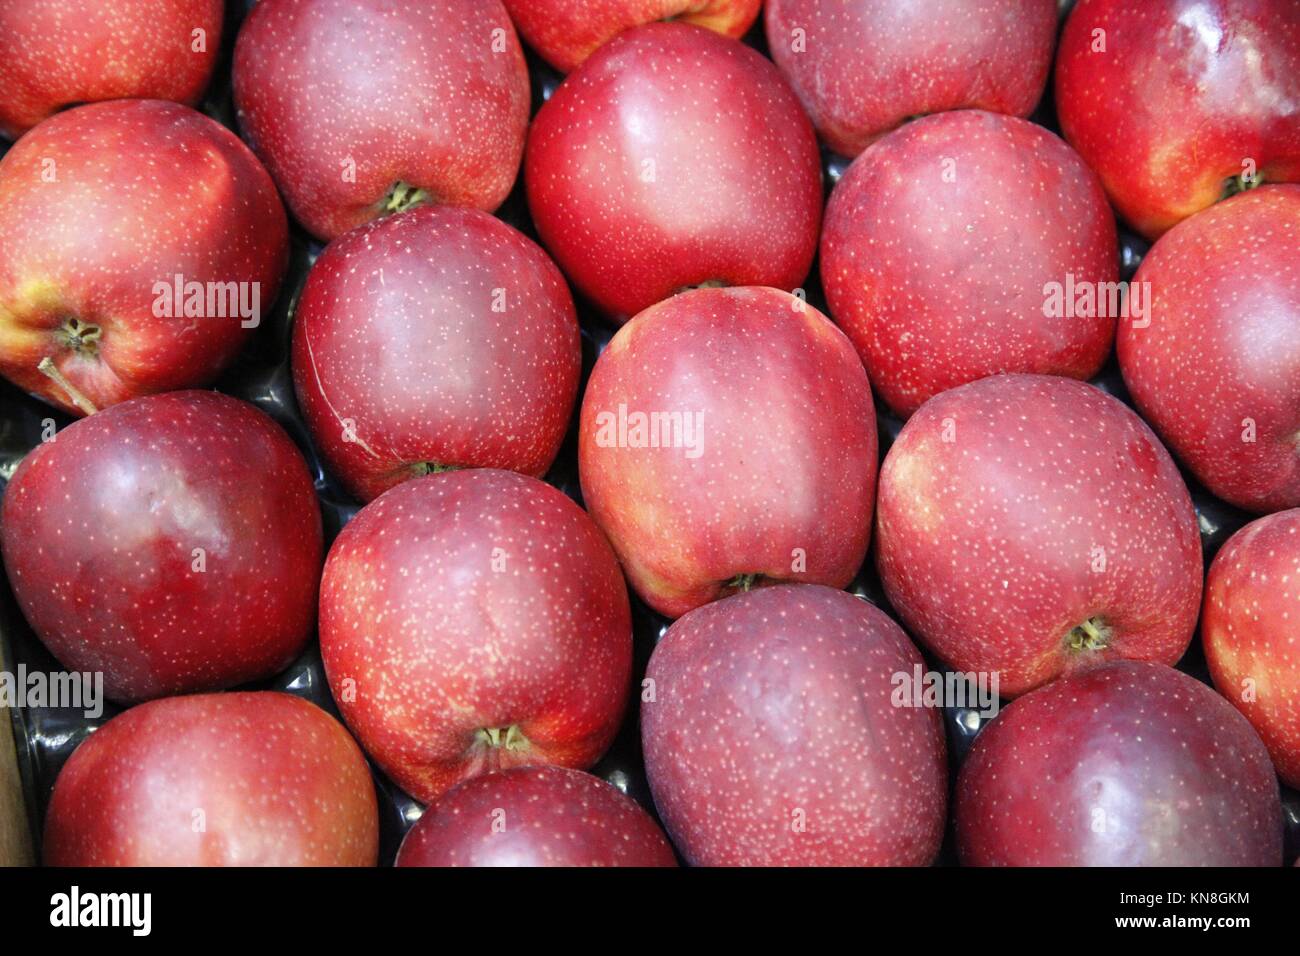 Red apples. Stock Photo